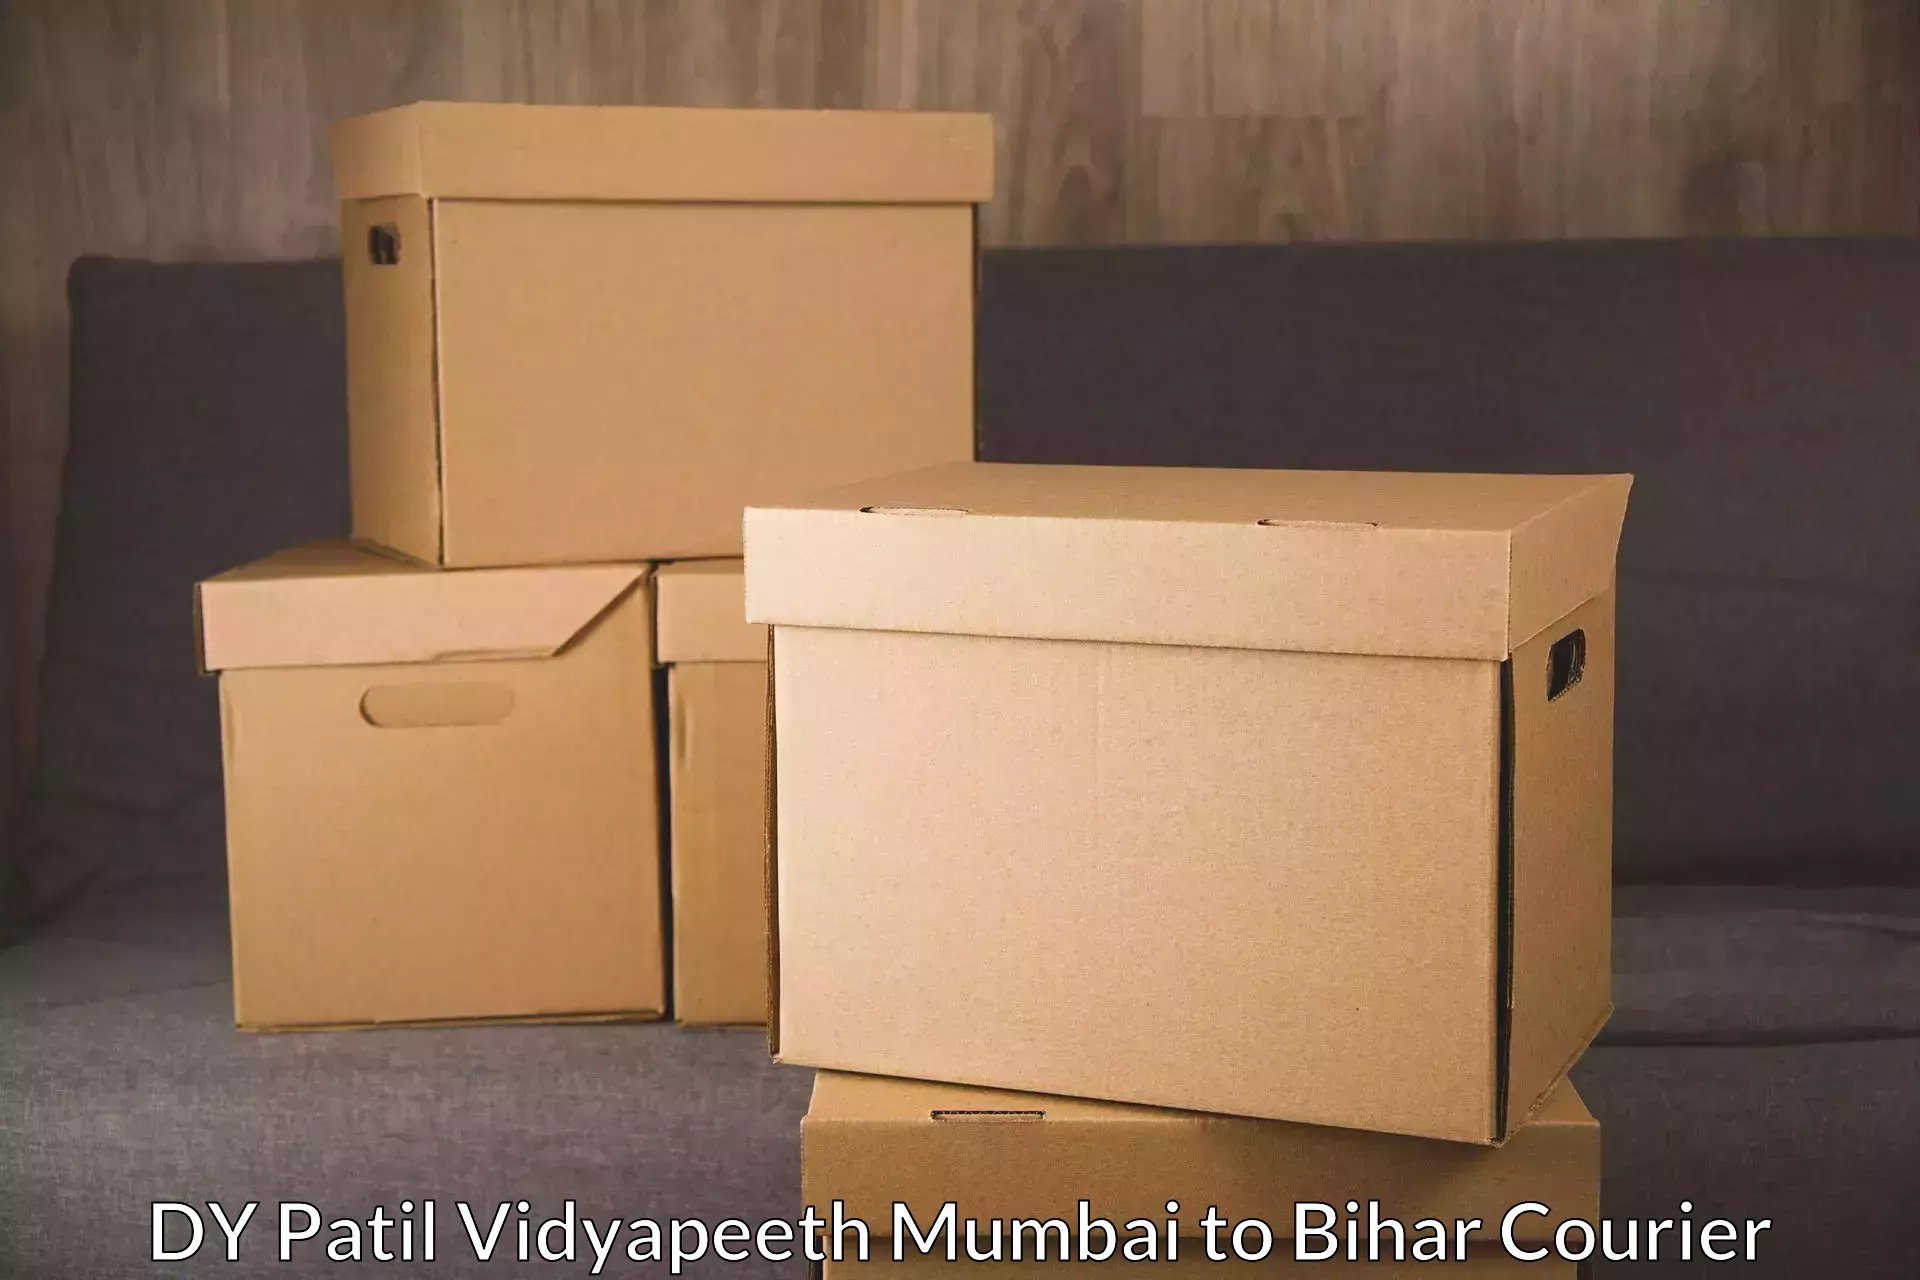 Parcel service for businesses in DY Patil Vidyapeeth Mumbai to Bihar